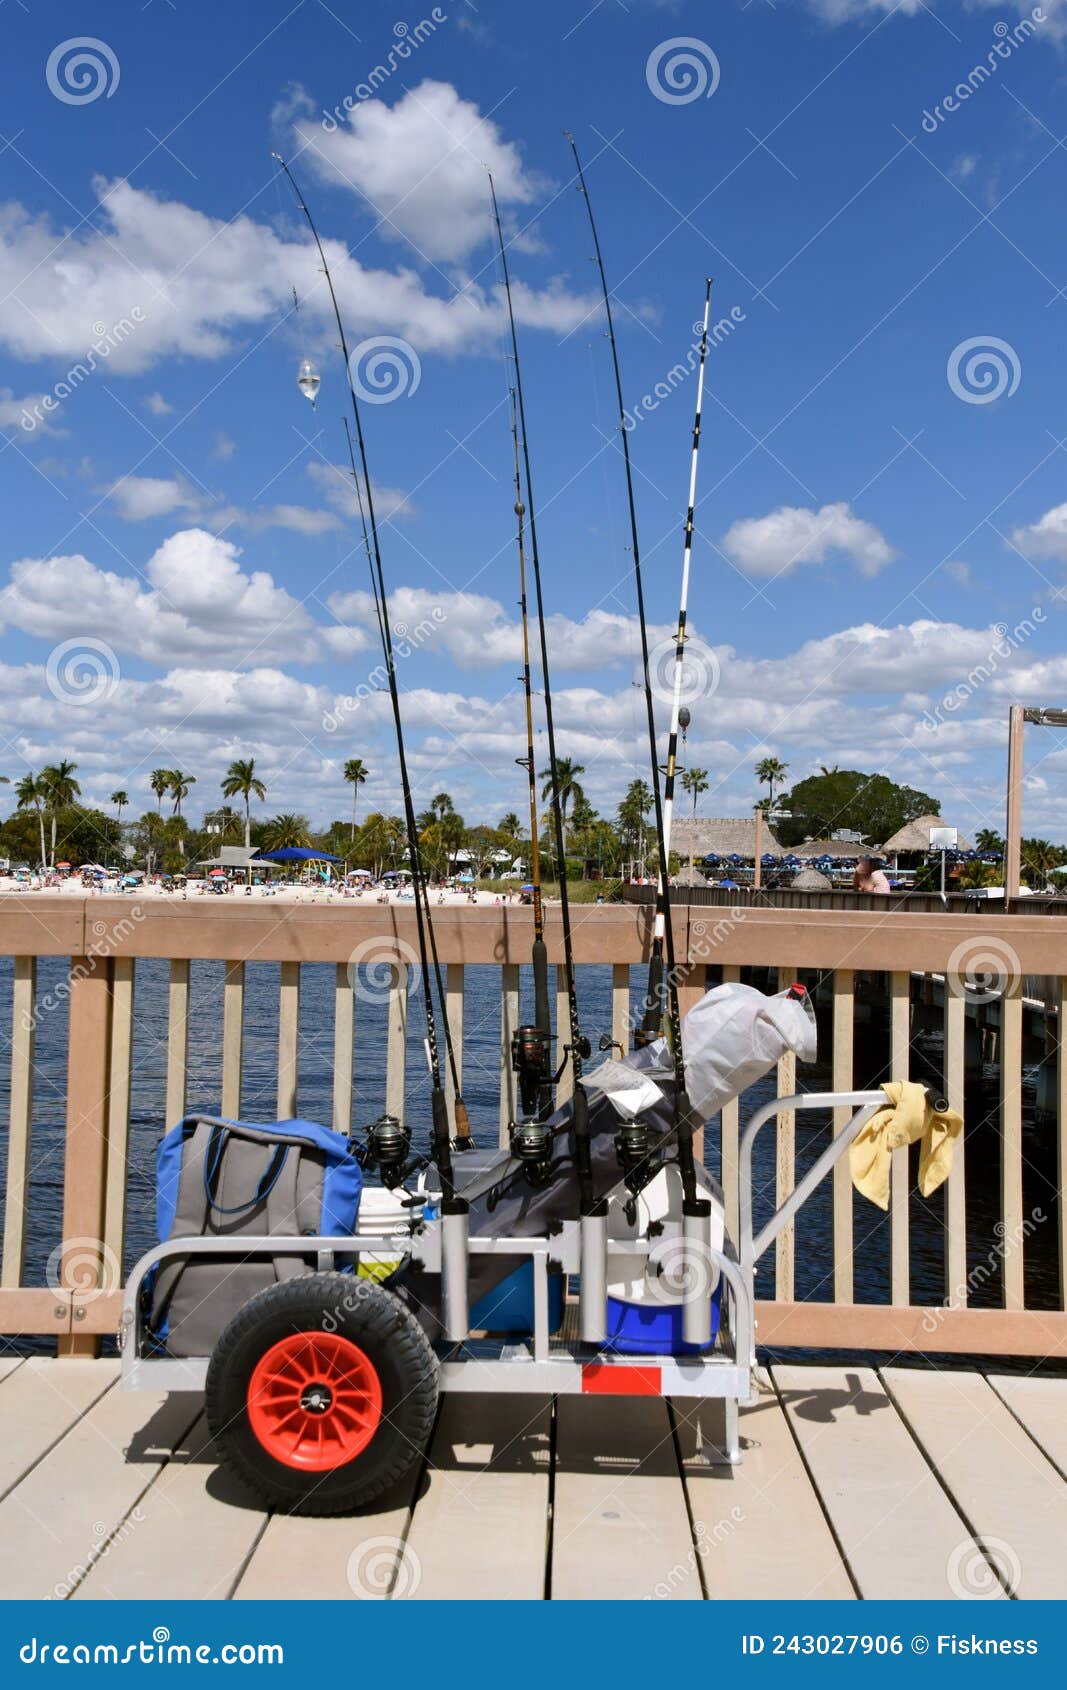 A Cart Full of Fishing Gear is Located on a Pier with a Beach in the  Background Stock Photo - Image of sportsman, gear: 243027906